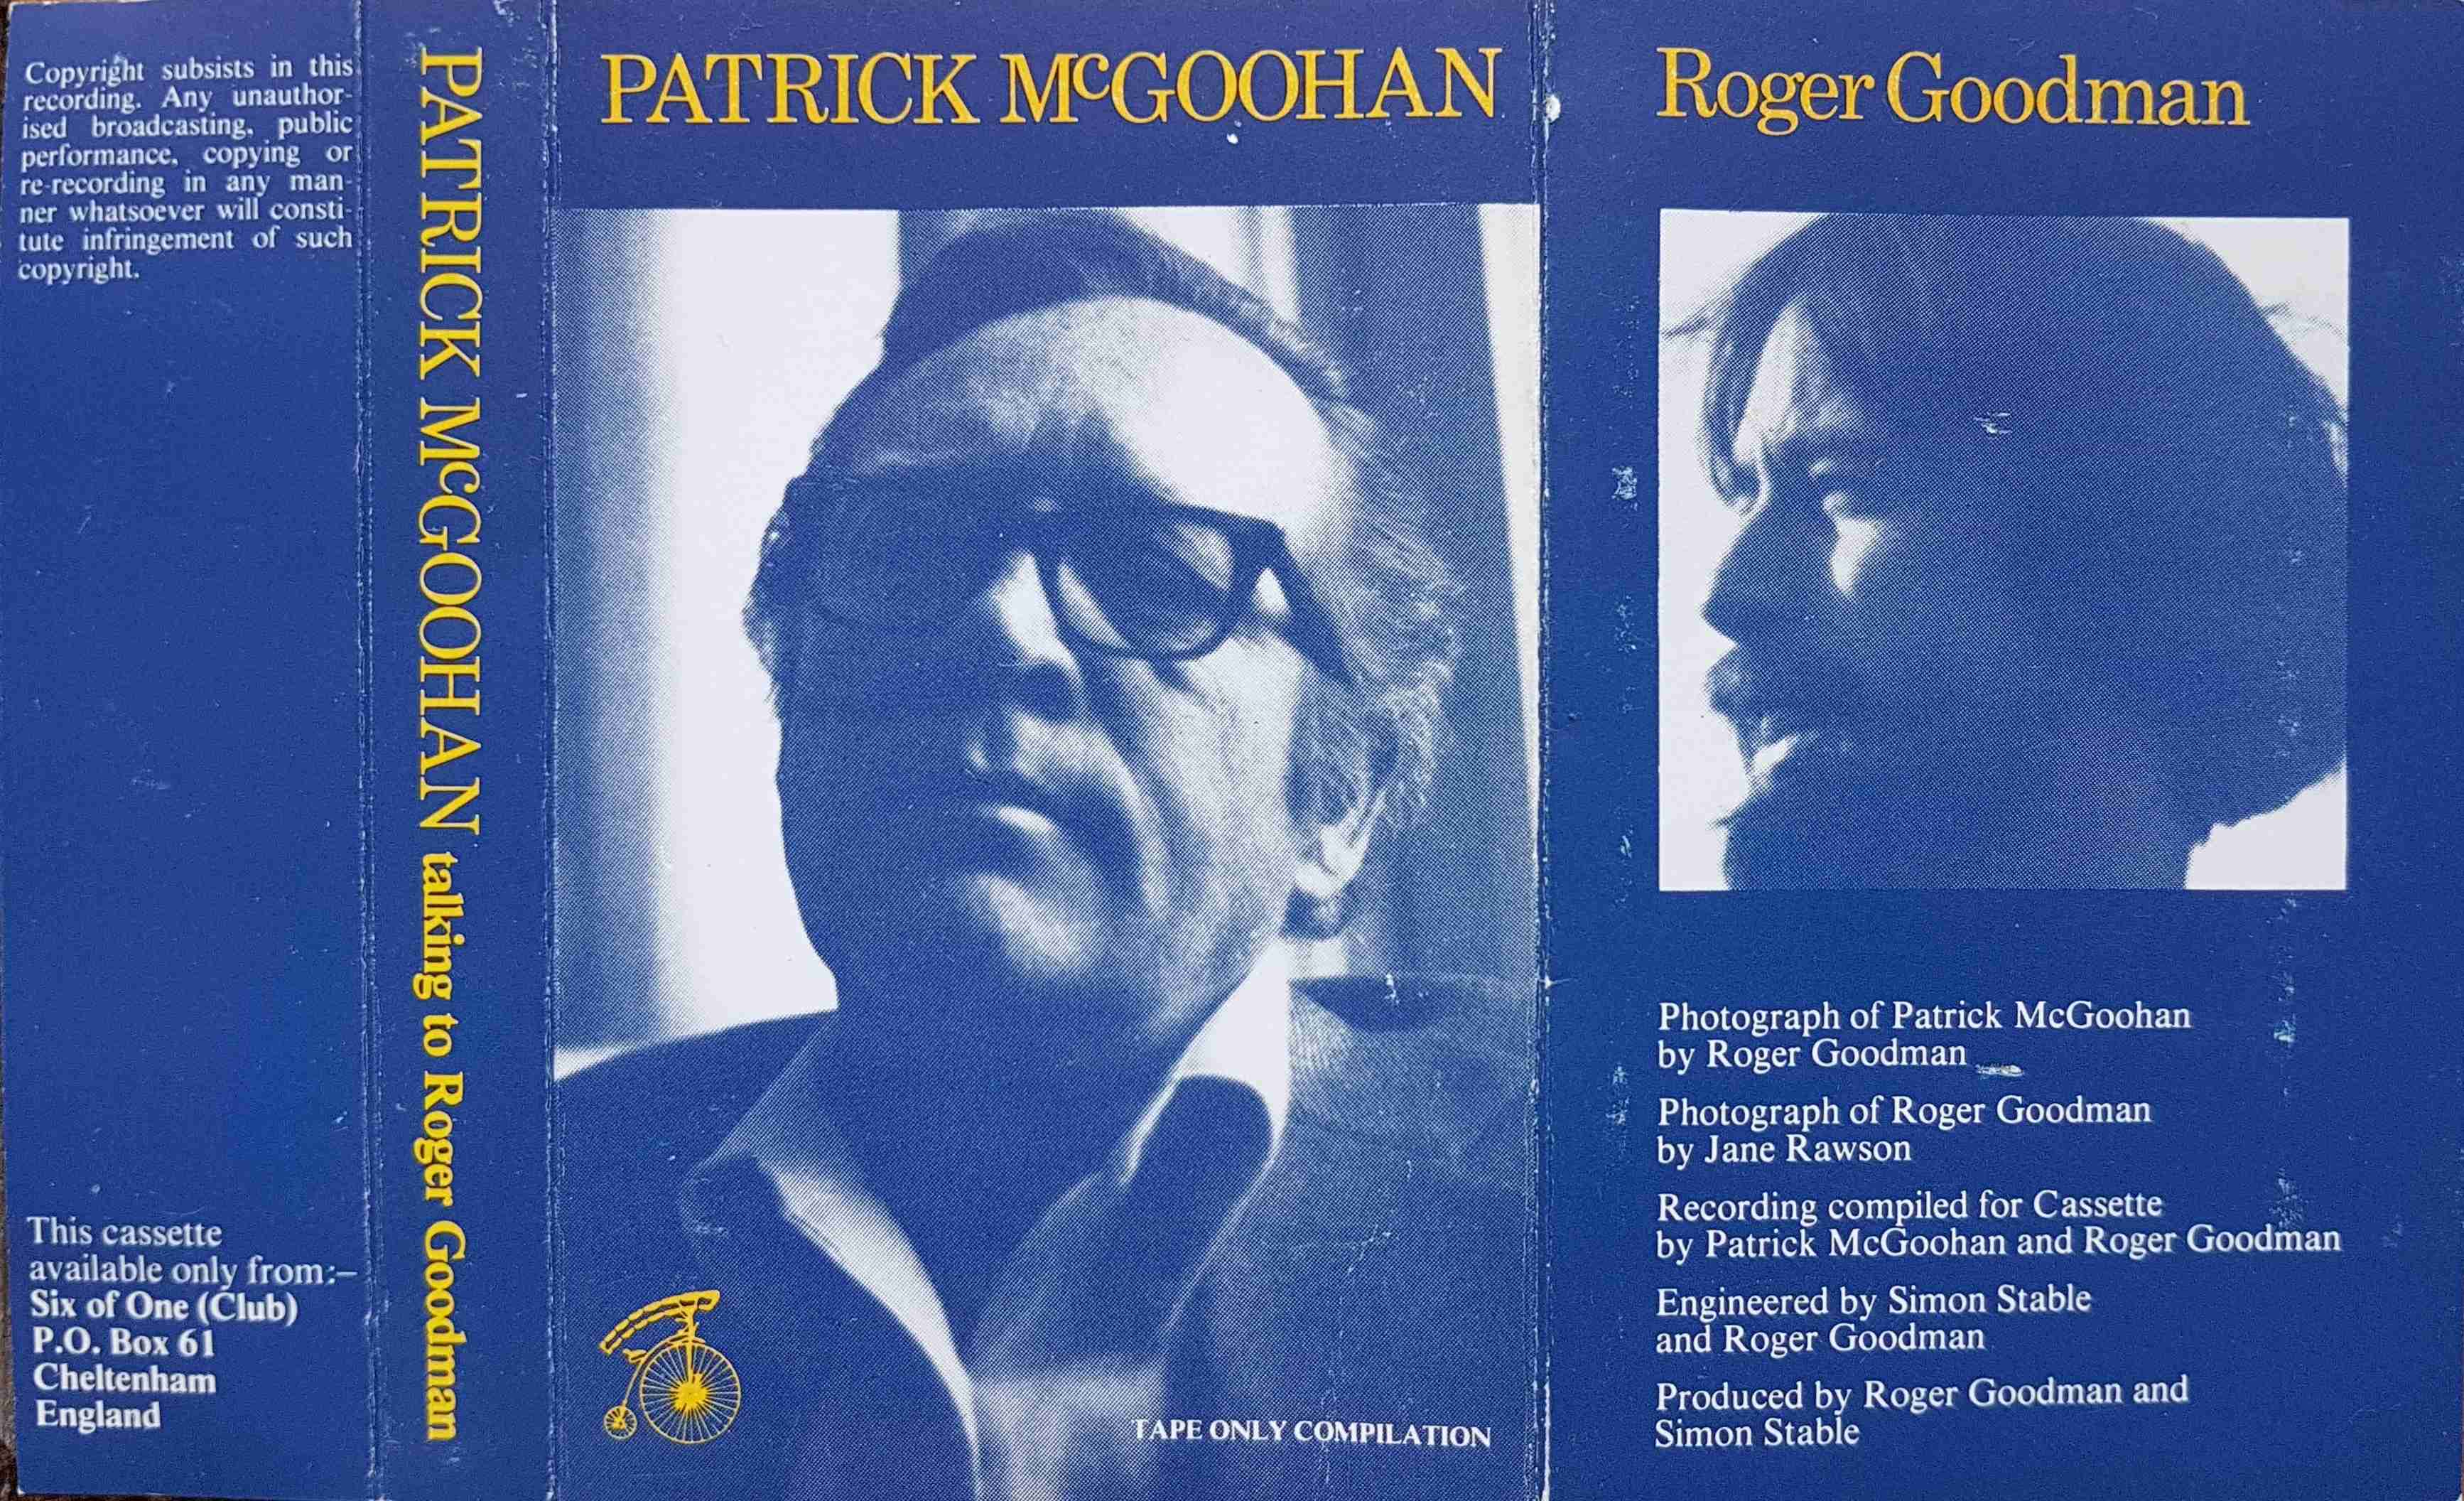 Picture of cassettes-PMG Patrick McGoohan talking to Roger Goodman by artist Patrick McGoohan from ITV, Channel 4 and Channel 5 library